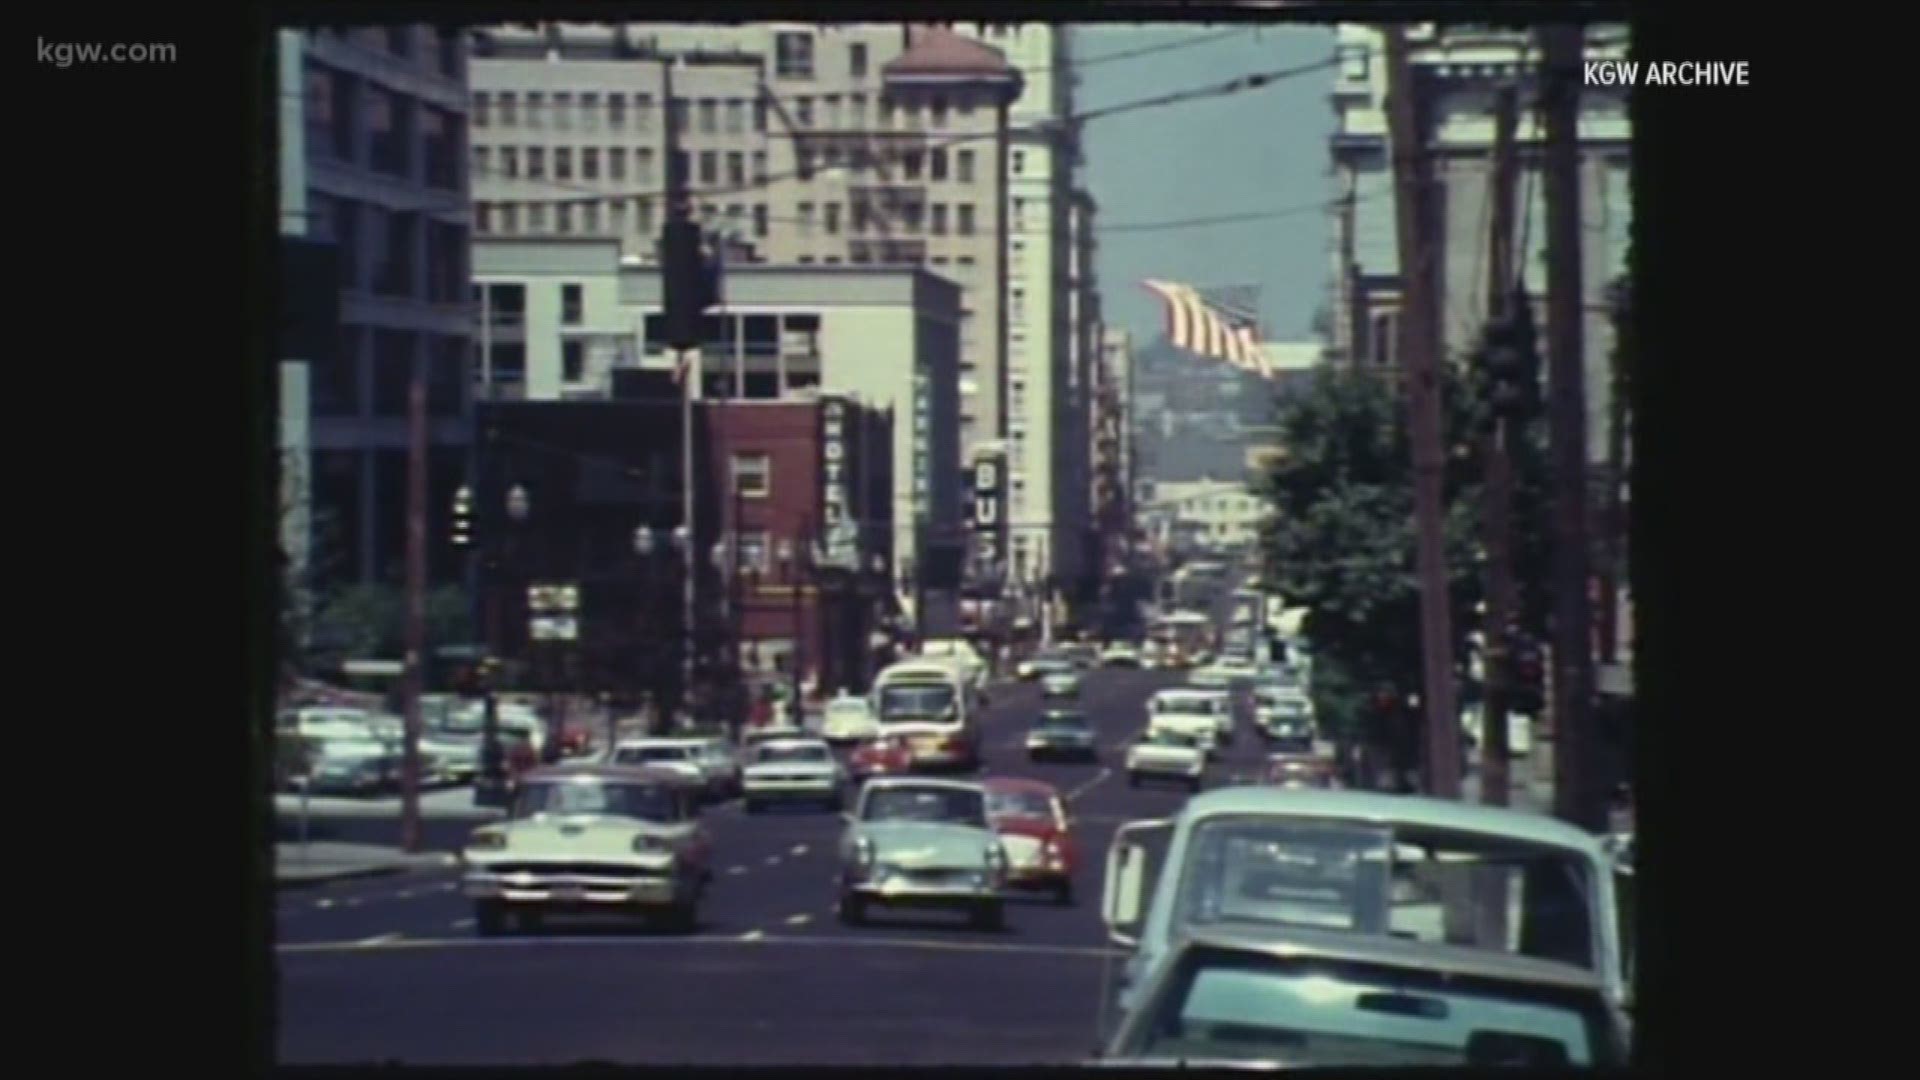 From the KGW archives, Portlanders react in July 1969 to the Apollo 11 moon landing. Astronauts visits central Oregon, which was thought to emulate the surface features of the moon.